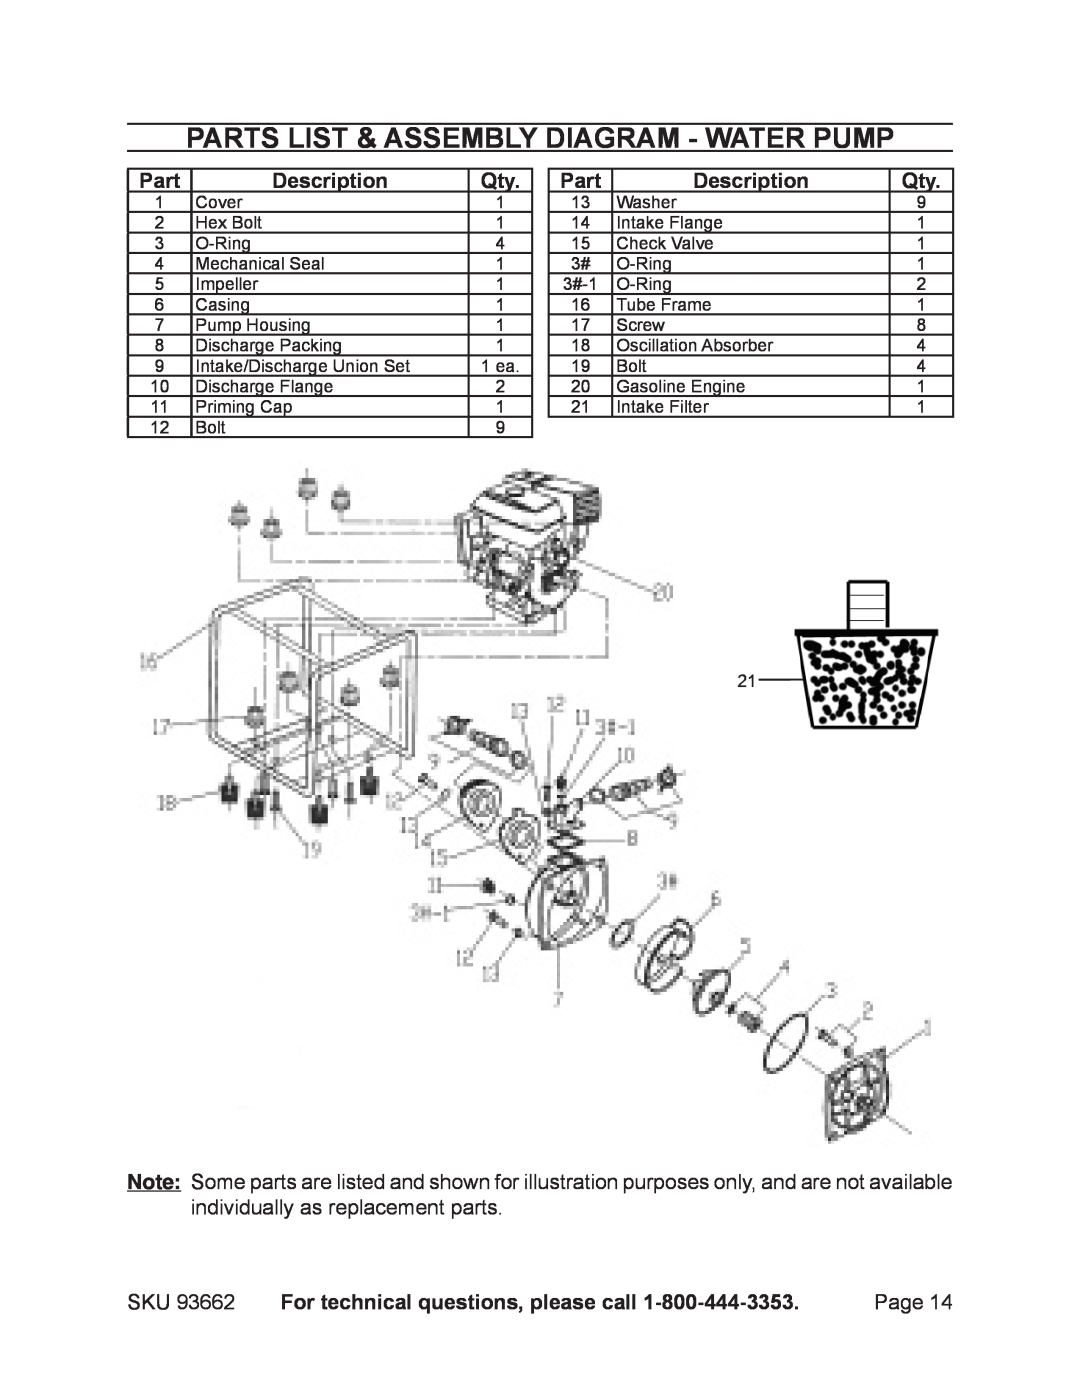 Harbor Freight Tools 93662 Parts List & Assembly Diagram - Water Pump, Description, For technical questions, please call 